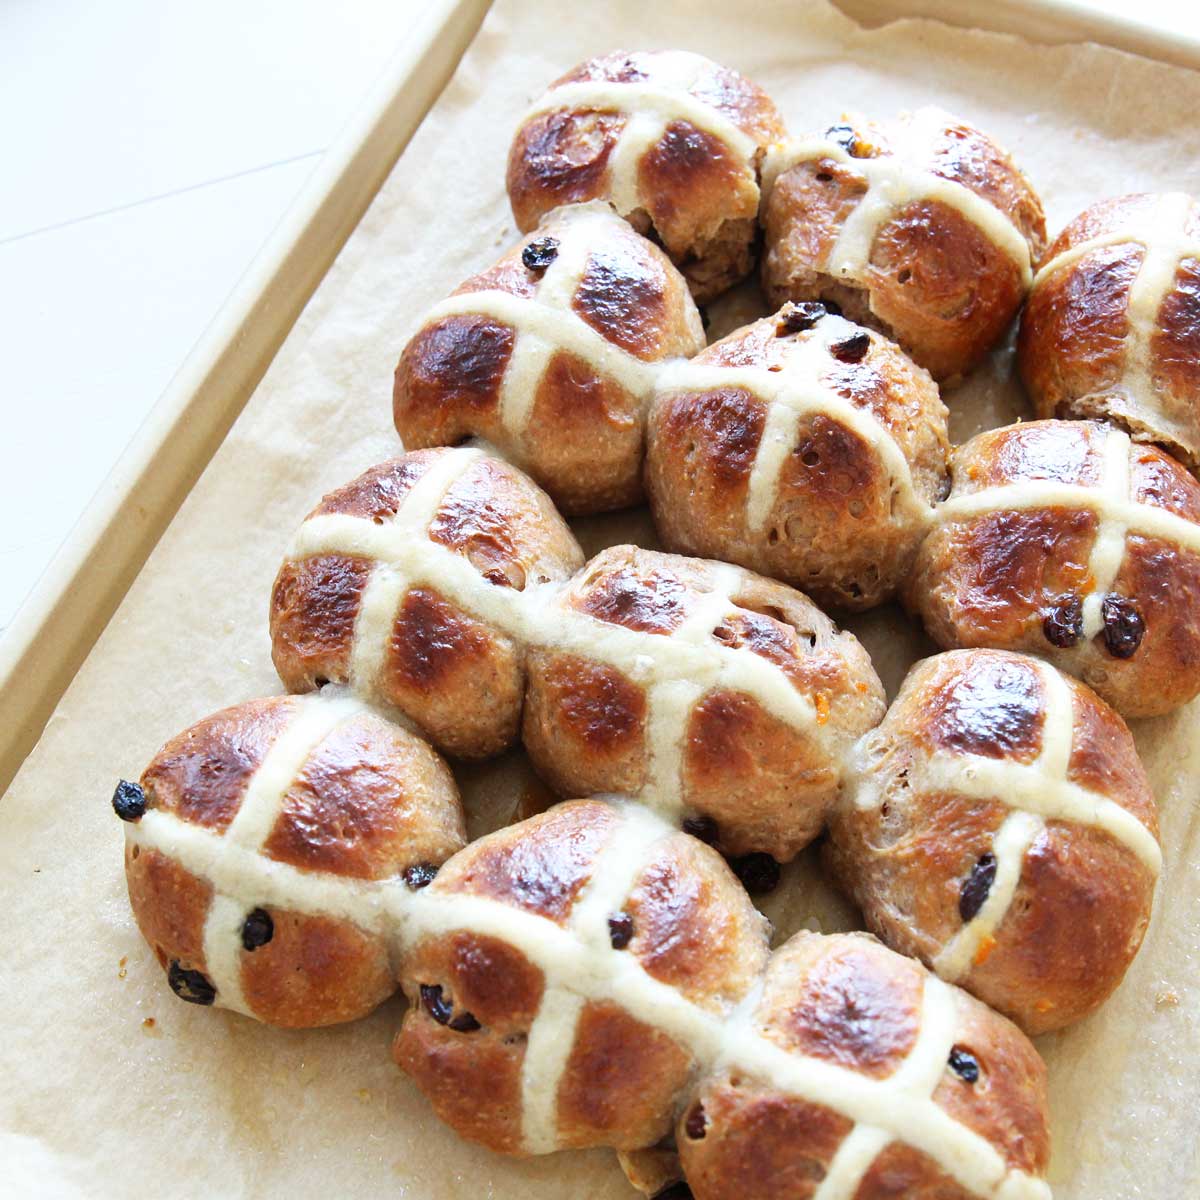 Soft & Fluffy Ricotta Cheese Hot Cross Buns - Perfect for Easter! - Peanut Butter Banana Bread